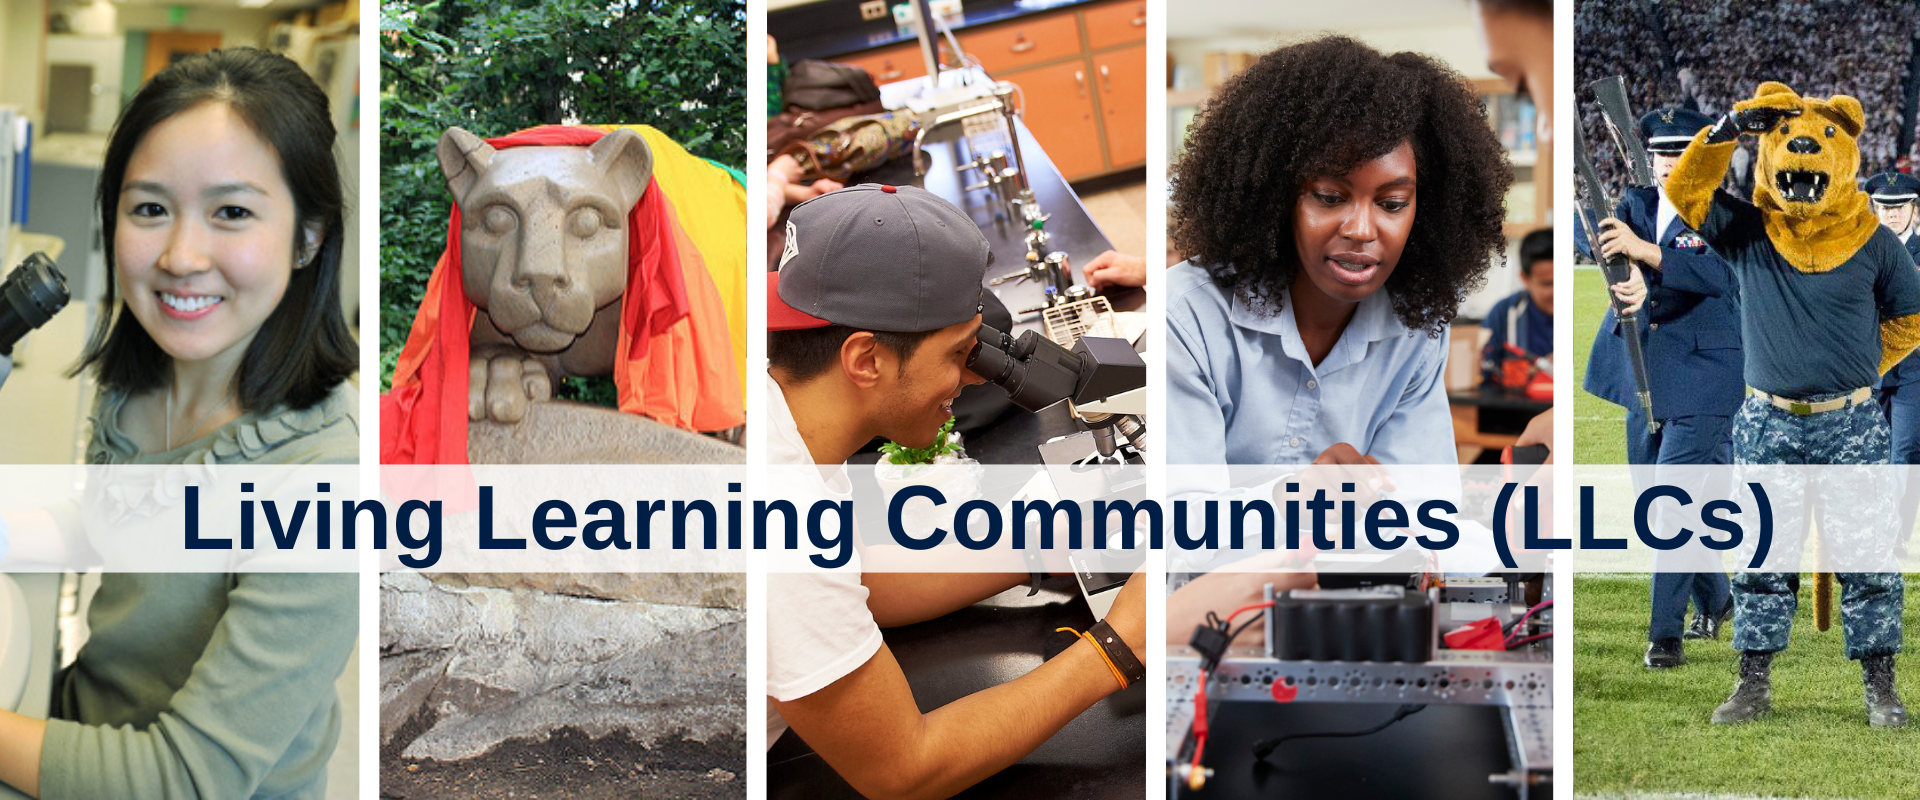 Living Learning Communities - a collage of images from various LLCs